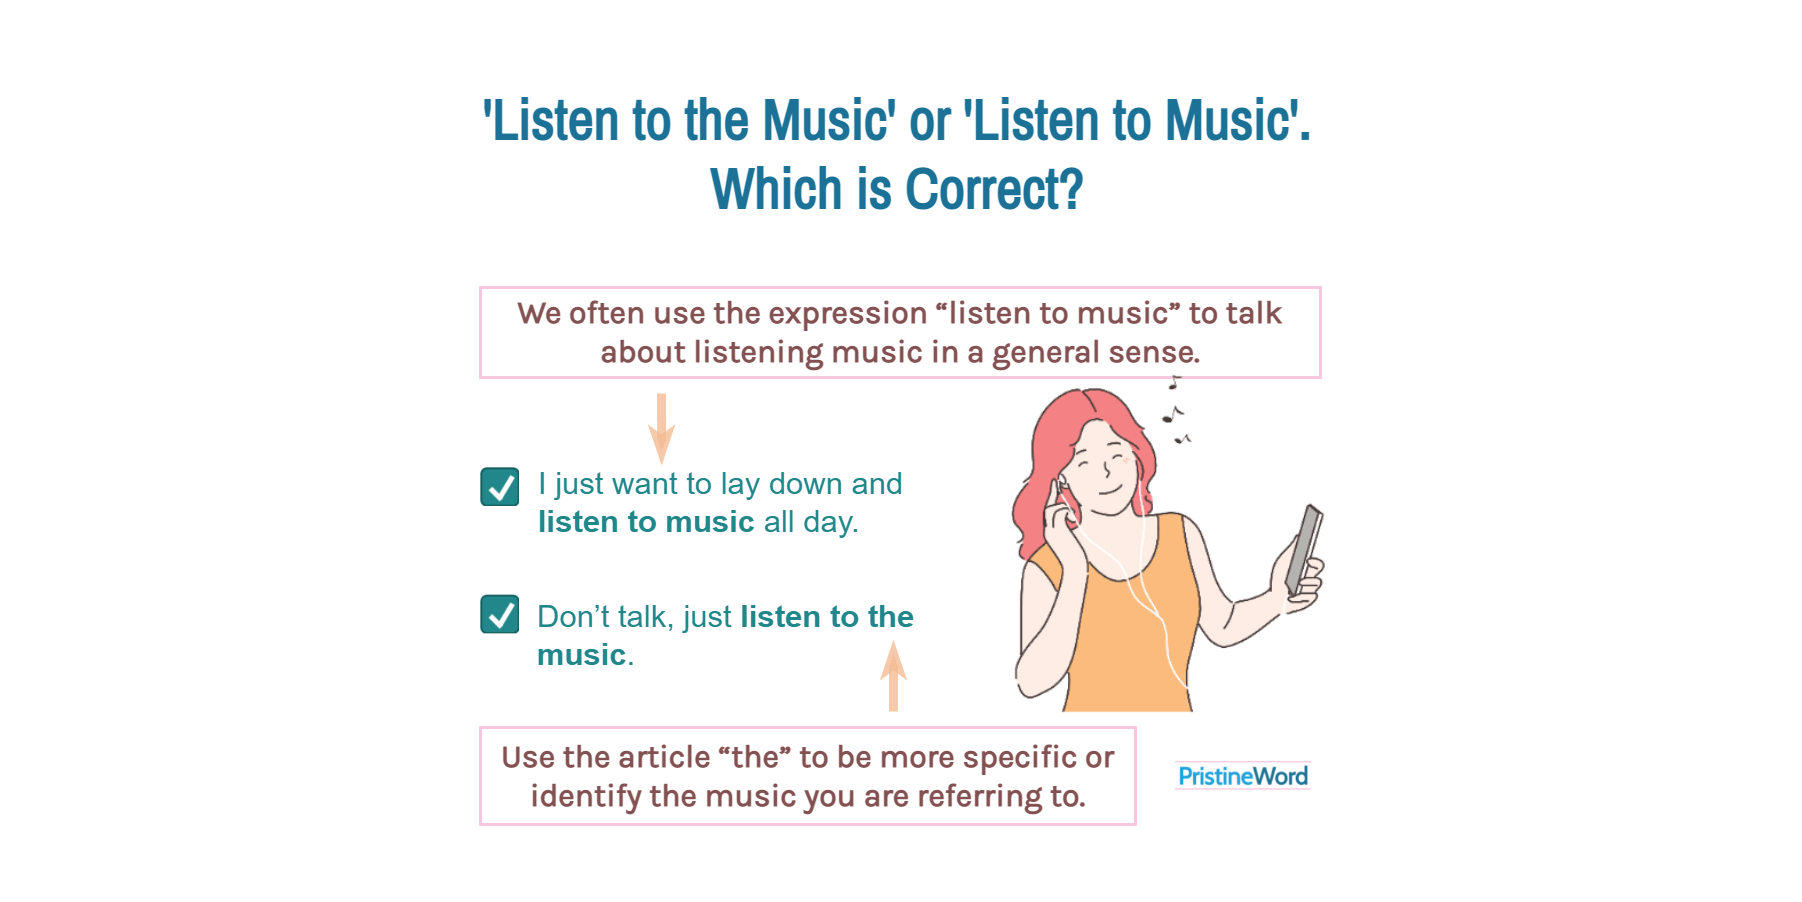 ‘Listen to Music’ or ‘Listen to the Music’. Which is Correct?